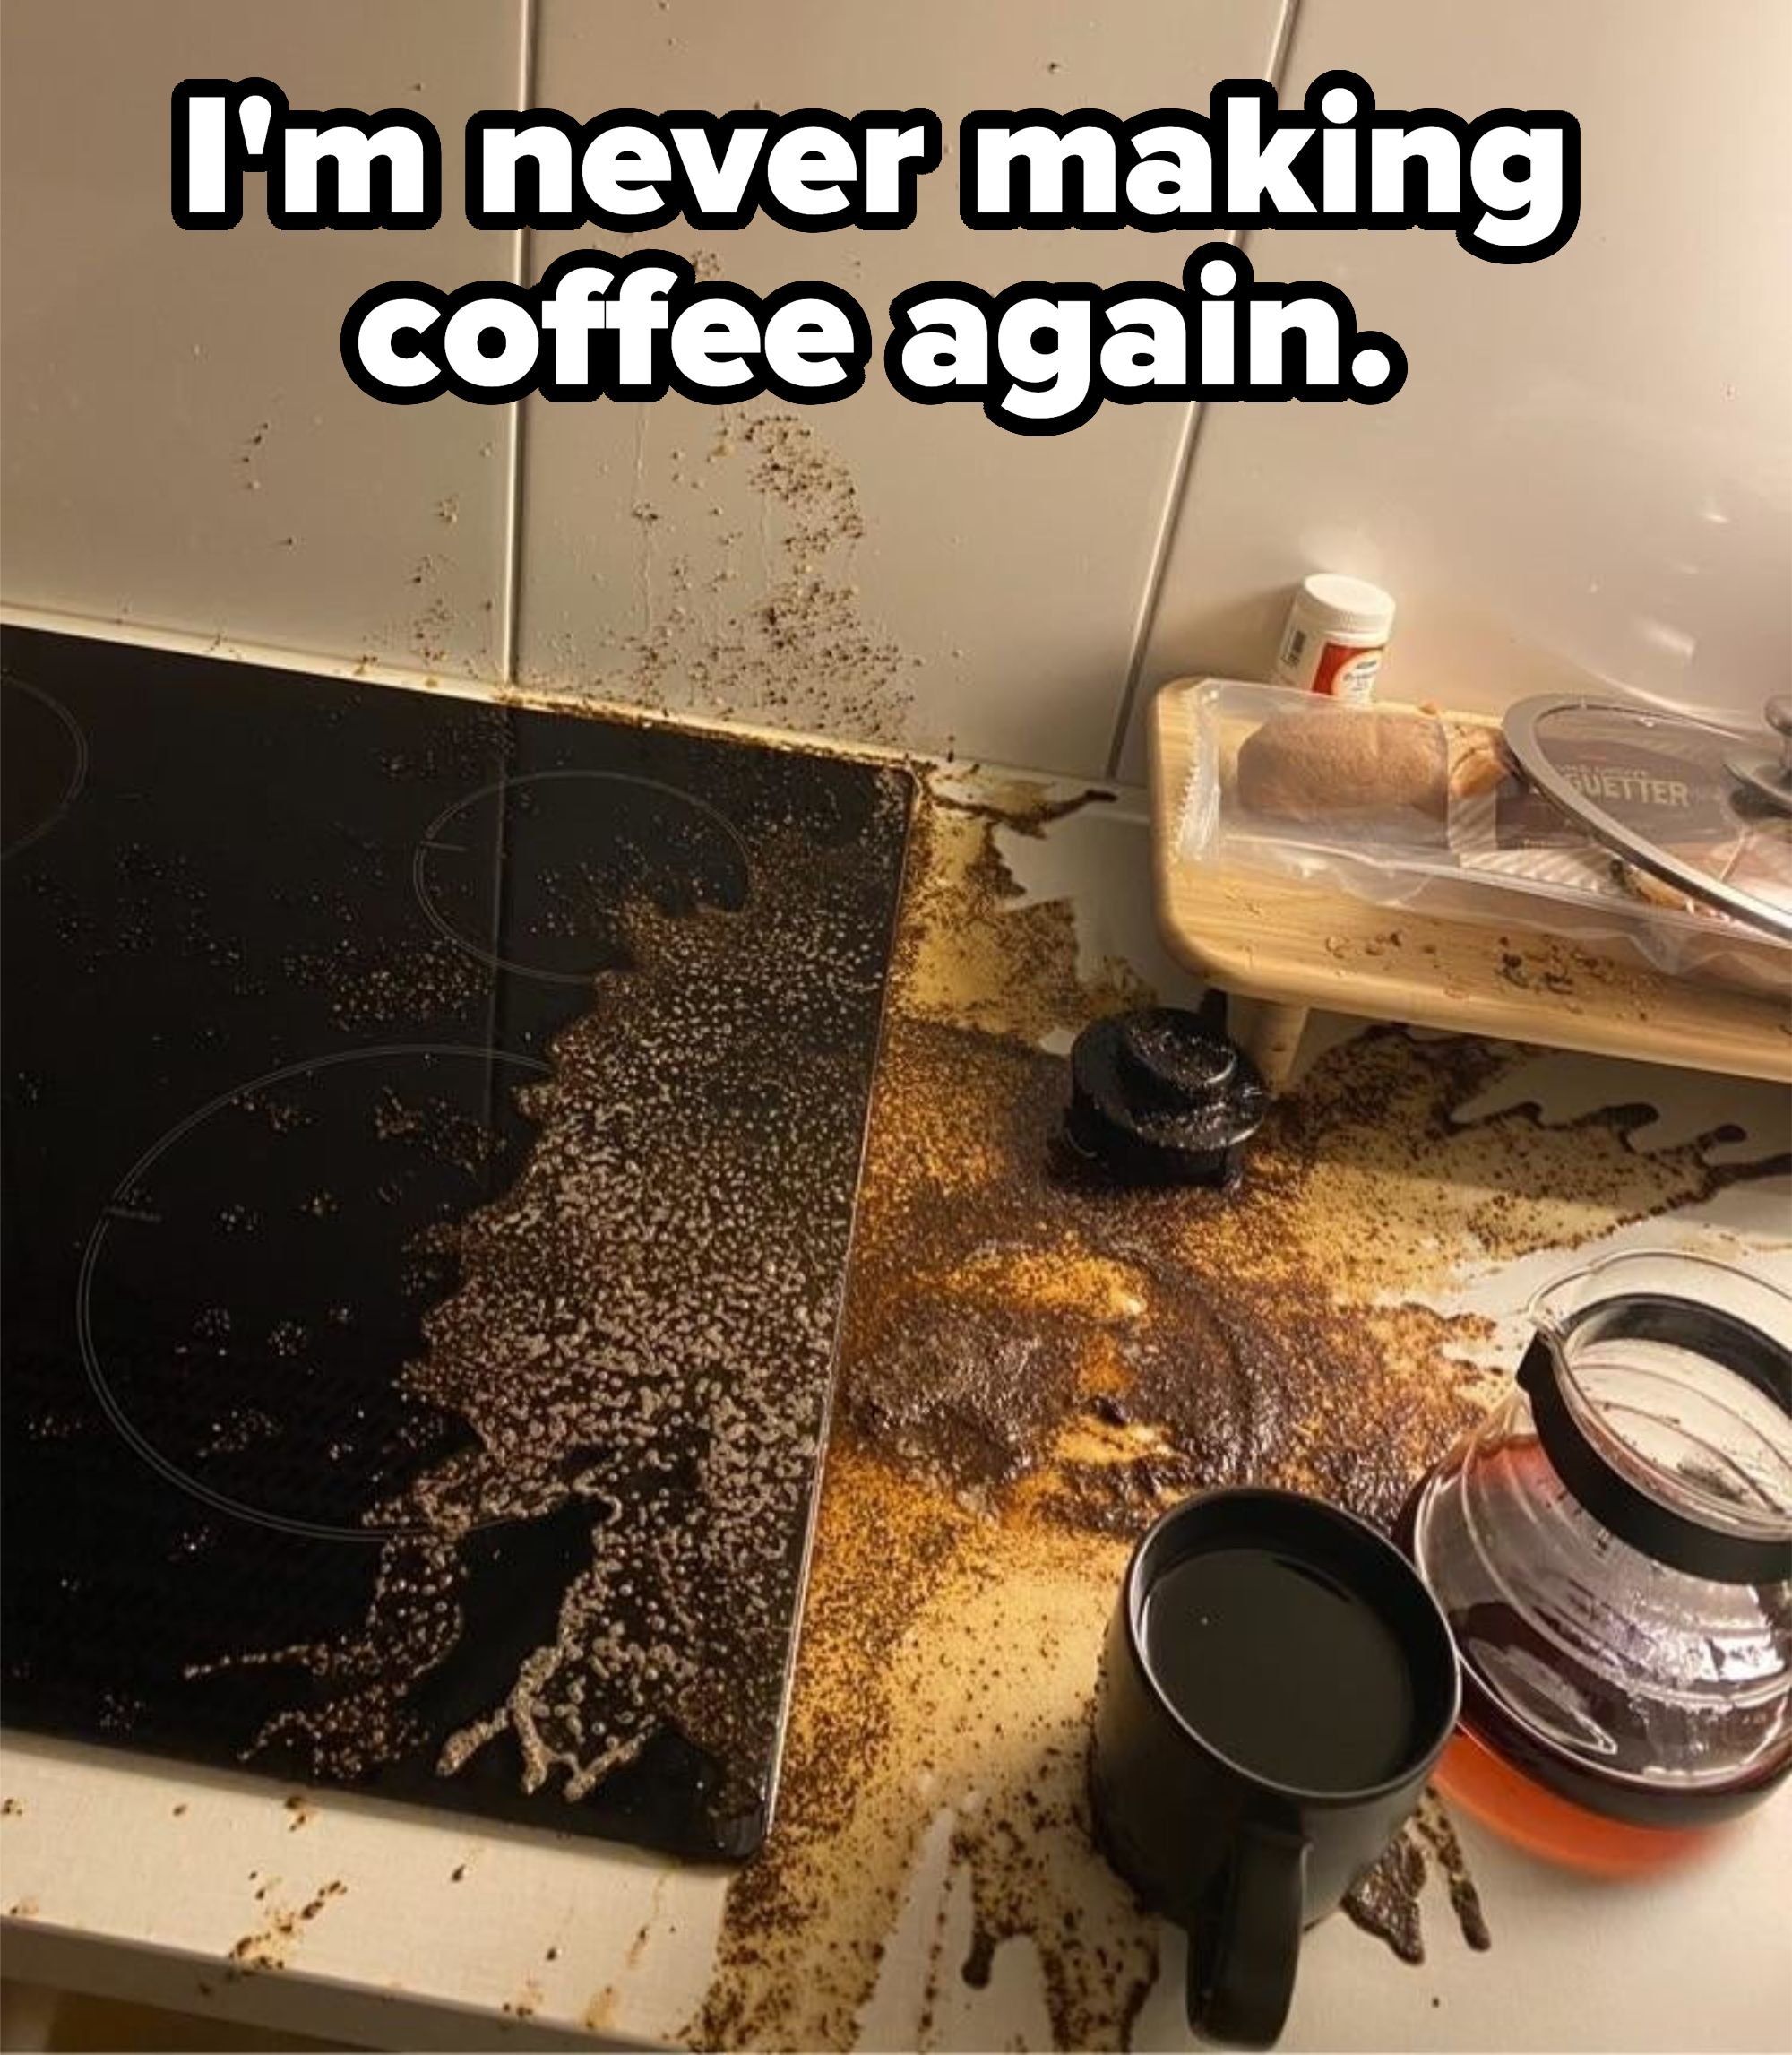 A kitchen counter with a coffee spill mess. Coffee grounds cover the stove, counter, and a black cup nearby. Coffee pot and bread loaf in the background